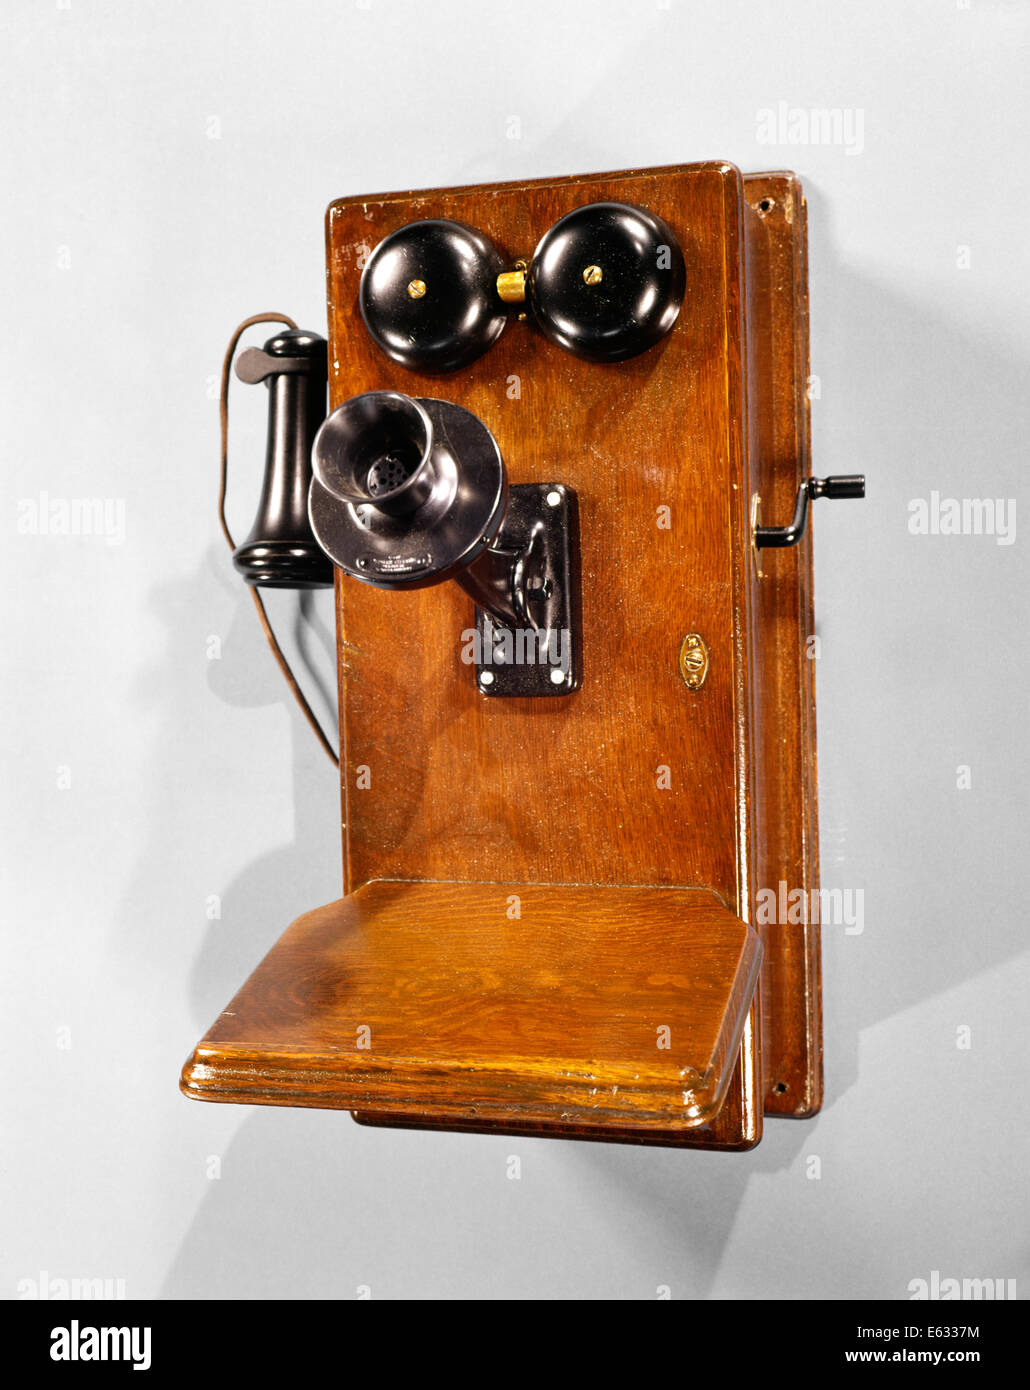 1910s ANTIQUE WOODEN WALL TELEPHONE Stock Photo